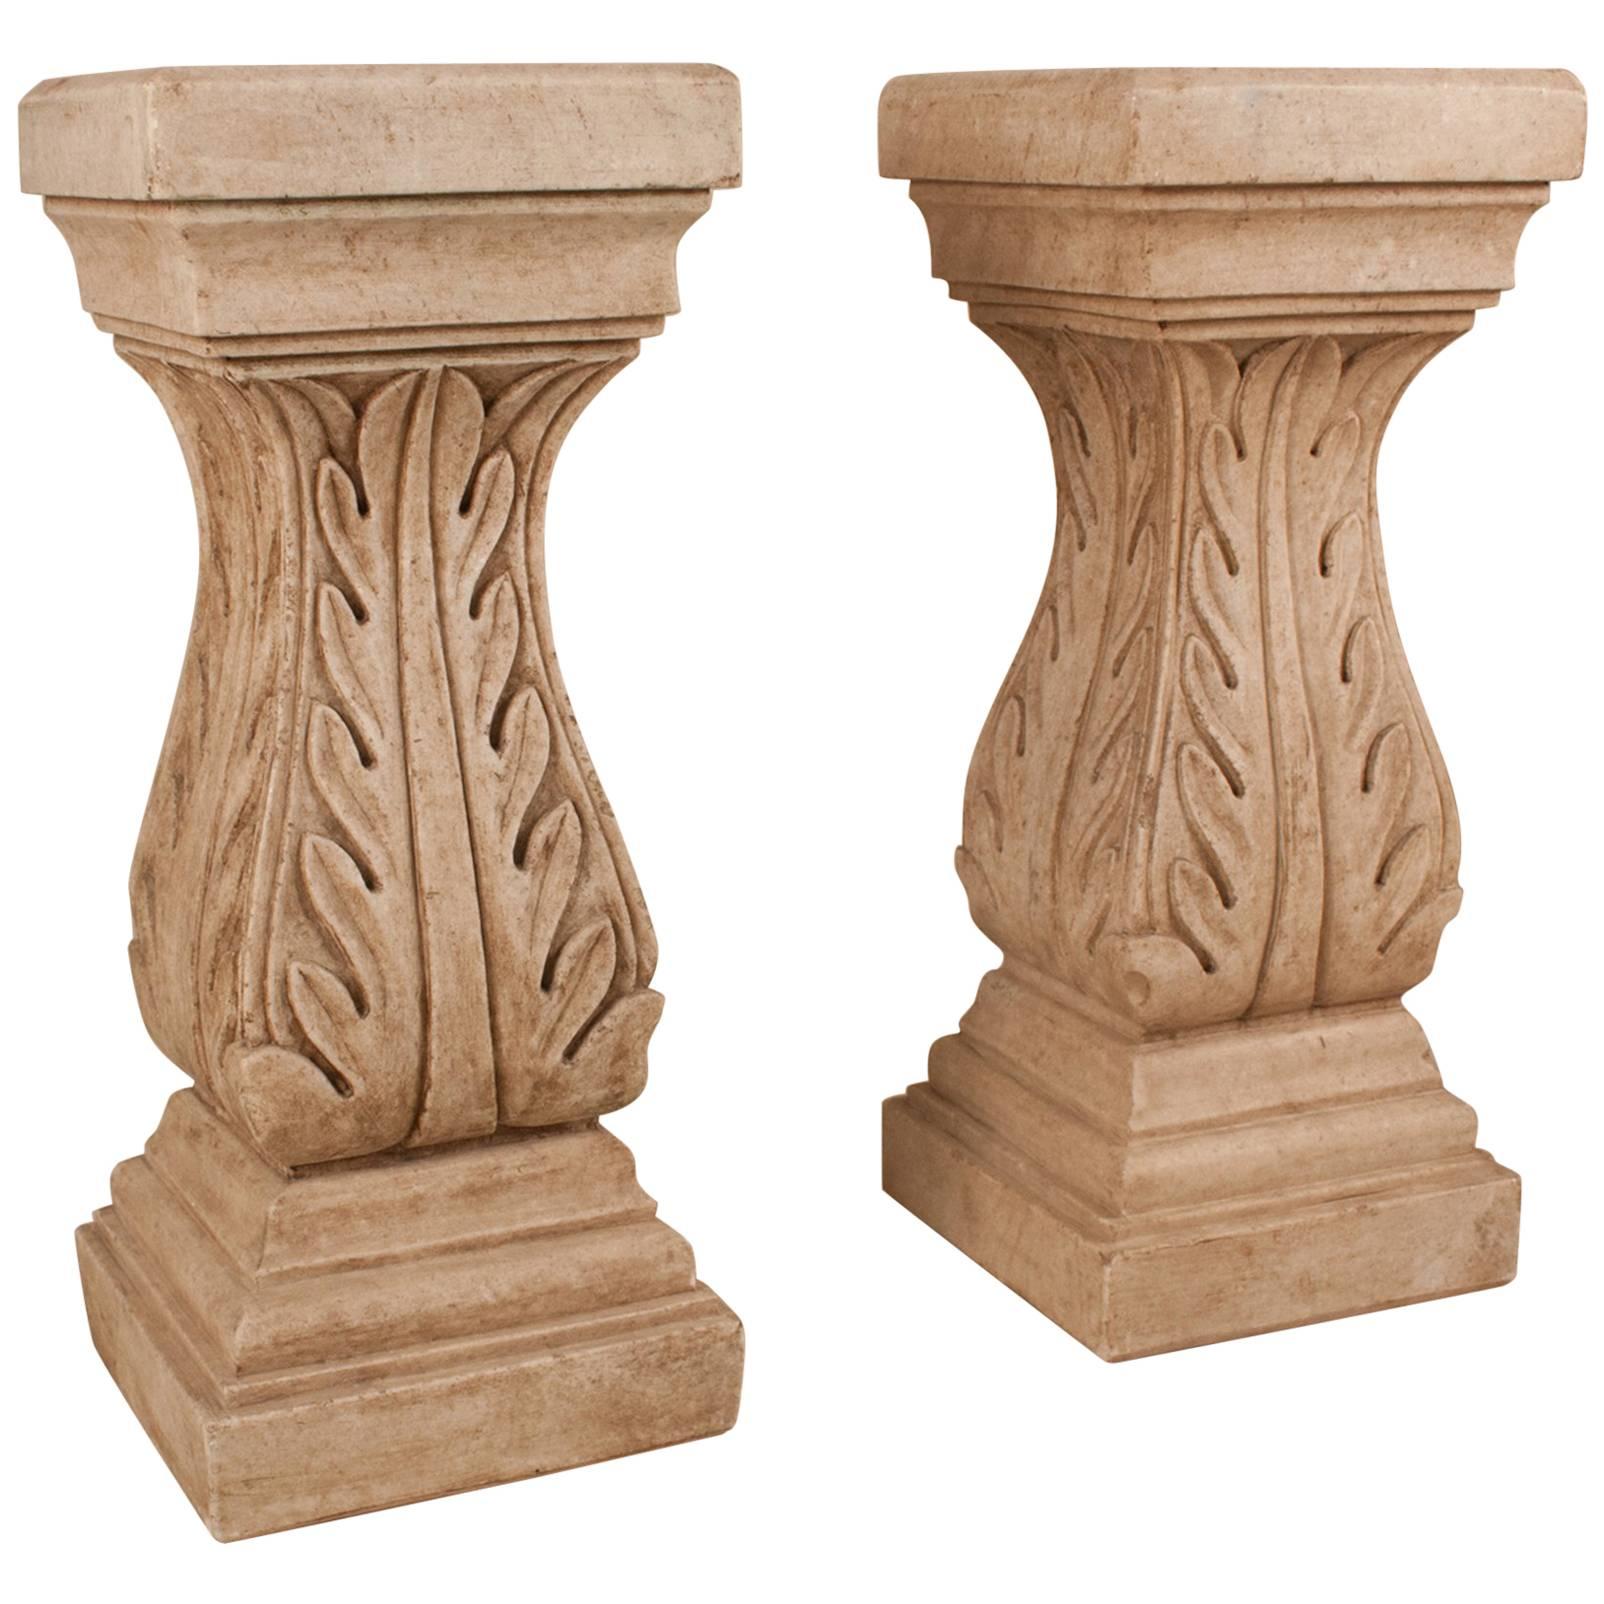 Pair of White Marble Pedestals or Stands